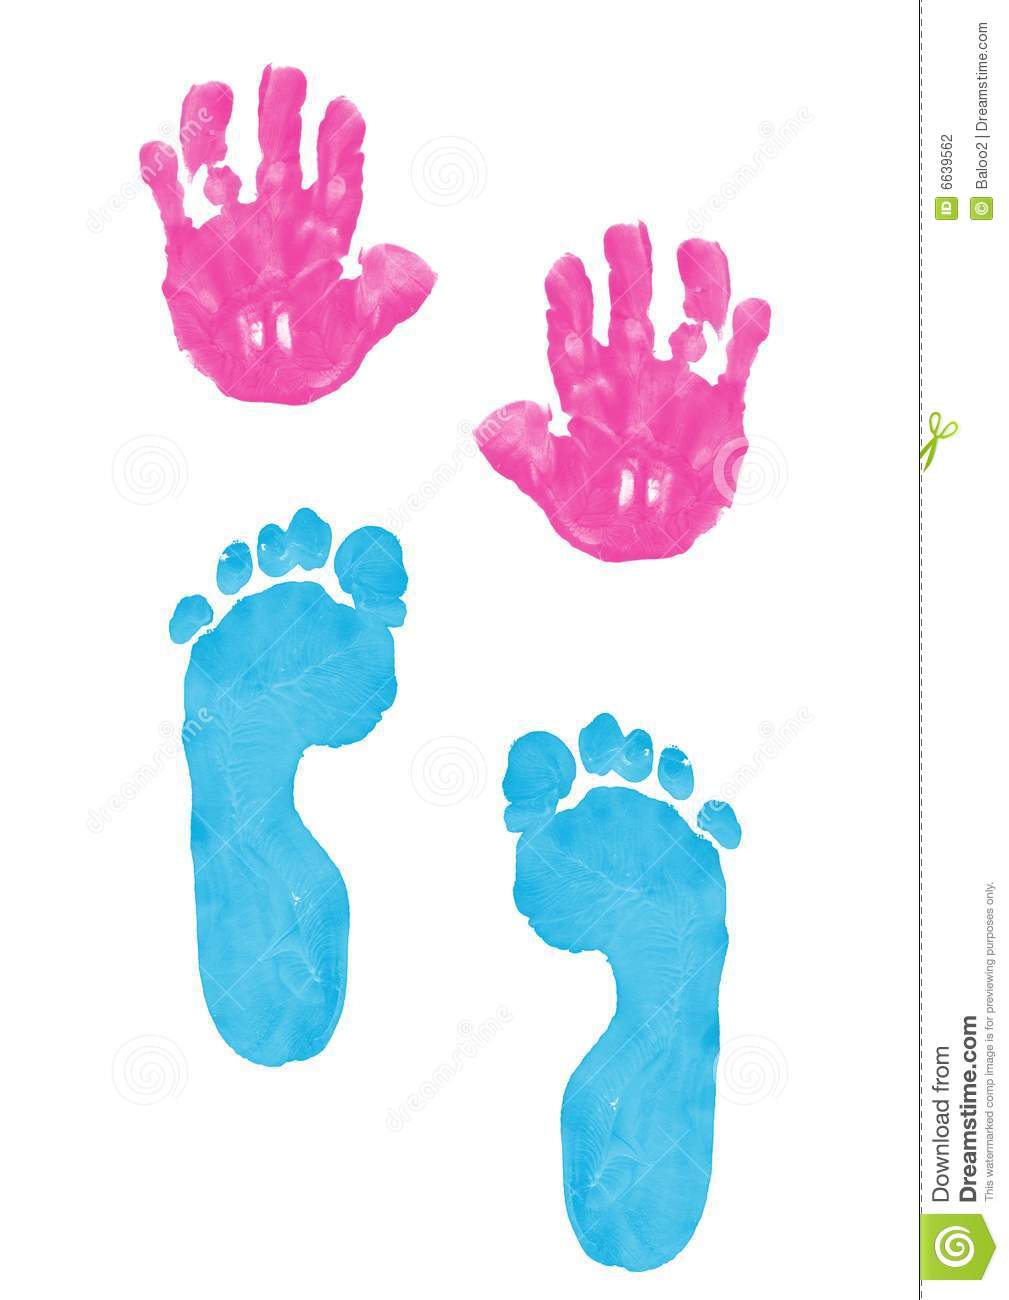 Child S Hand And Foot Prints Stock Photography   Image  6639562